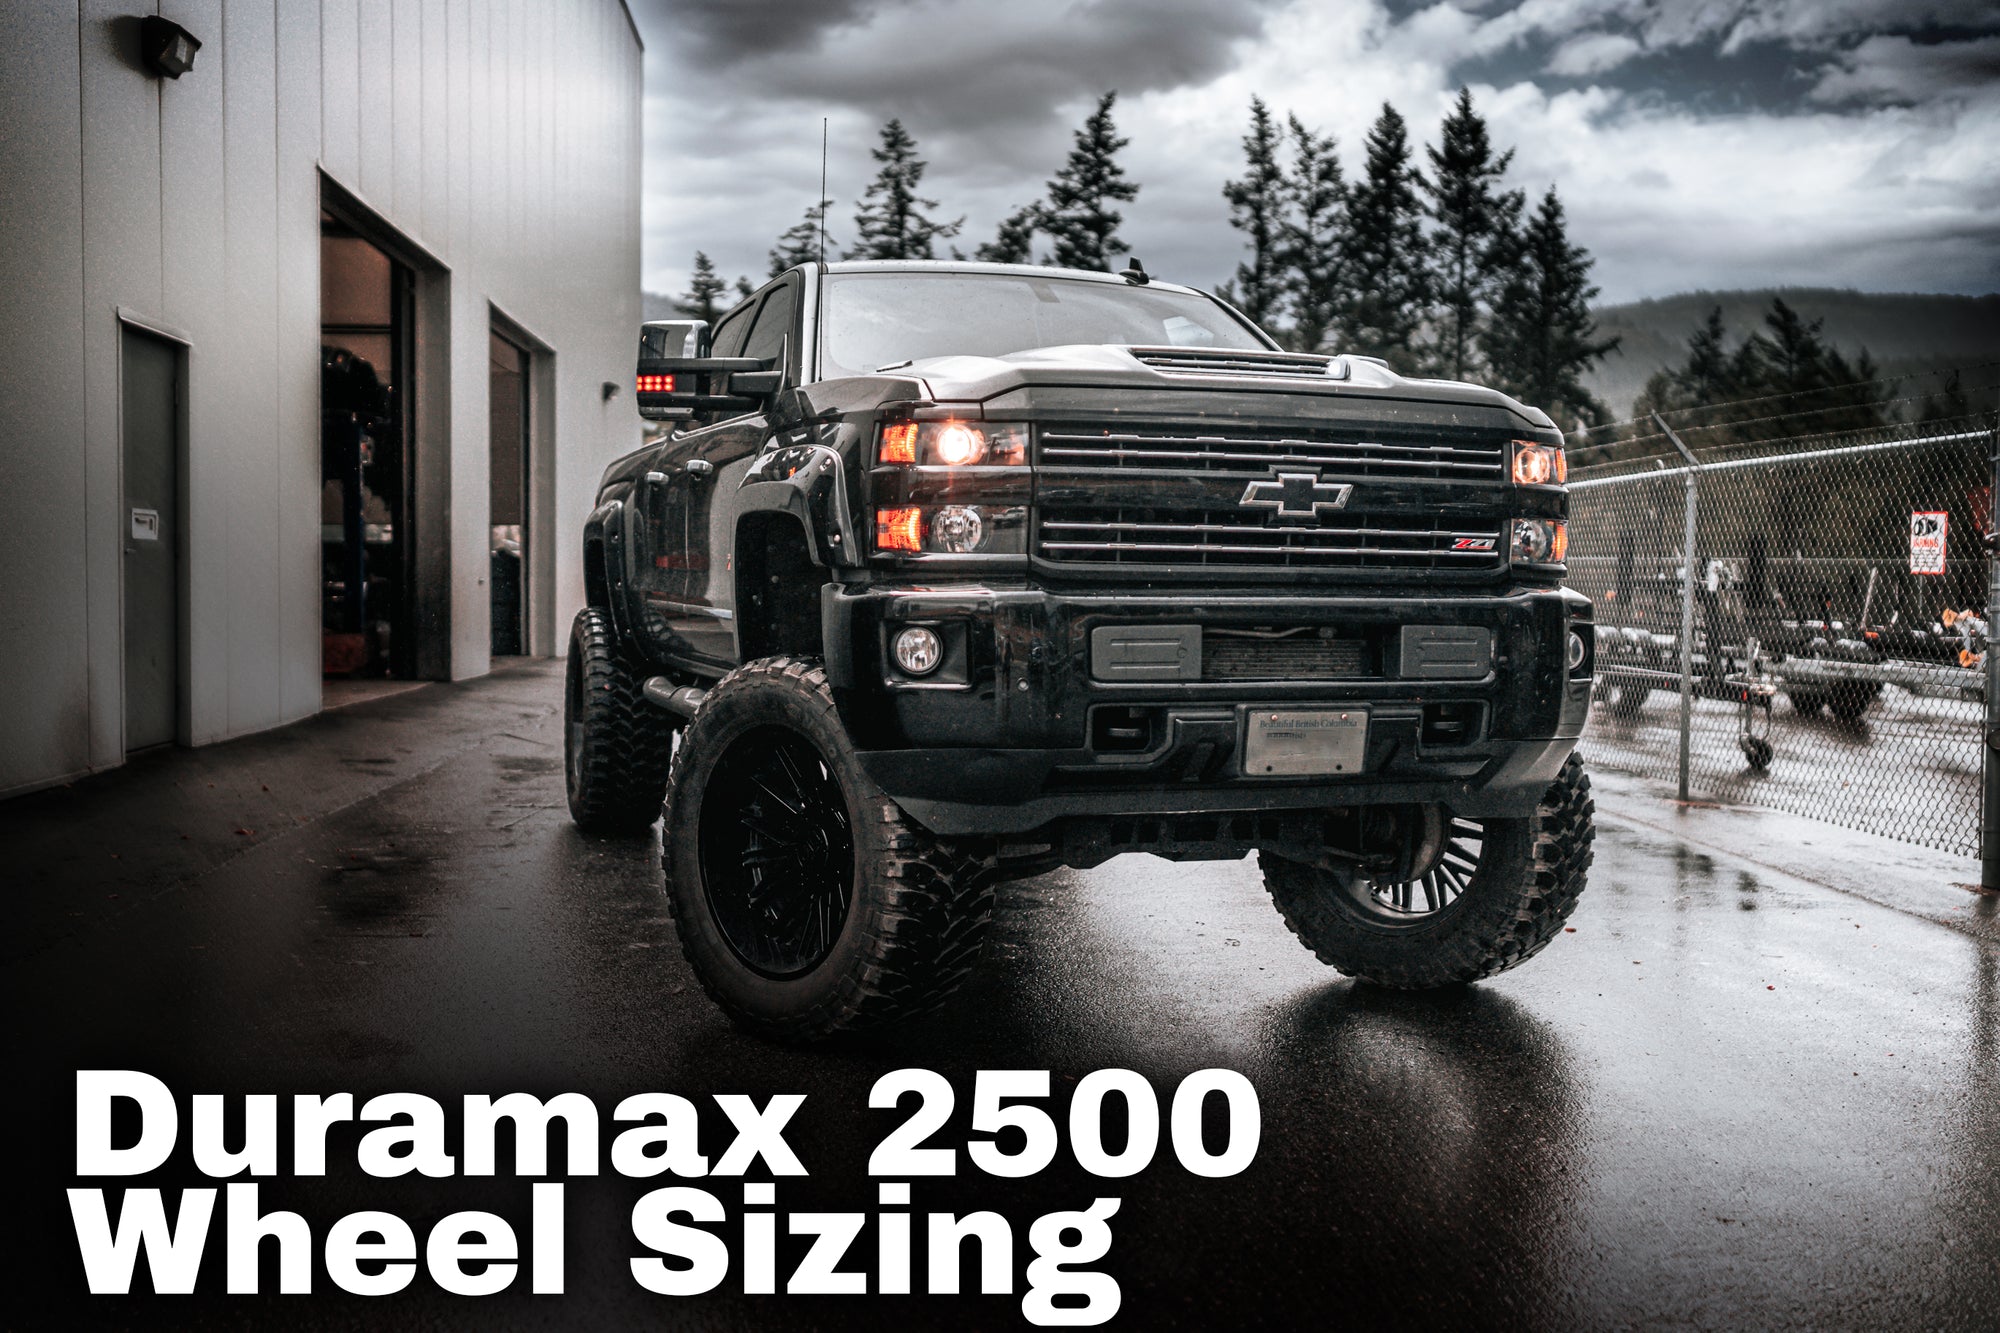 Duramax Rims: What size wheels will fit on my Chevy 2500?